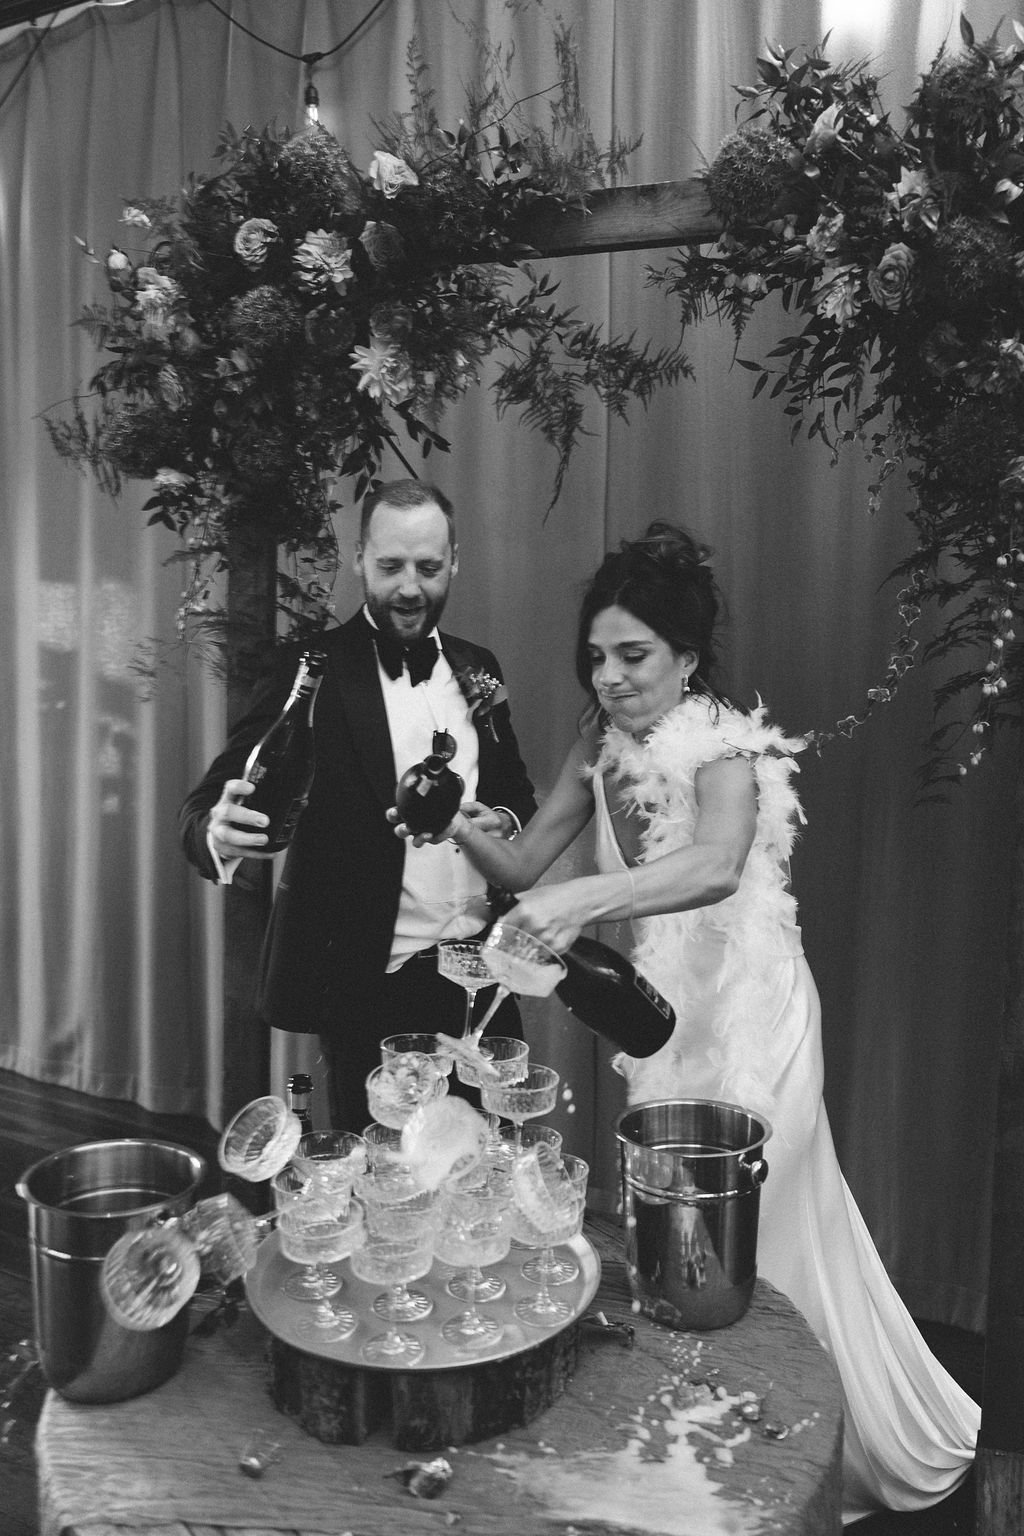  An awesome black and white image of the bride and groom as their champagne tower collapses whilst the bride is pouring the champagne. The wedding photographer has captured the authentic moment perfectly. 